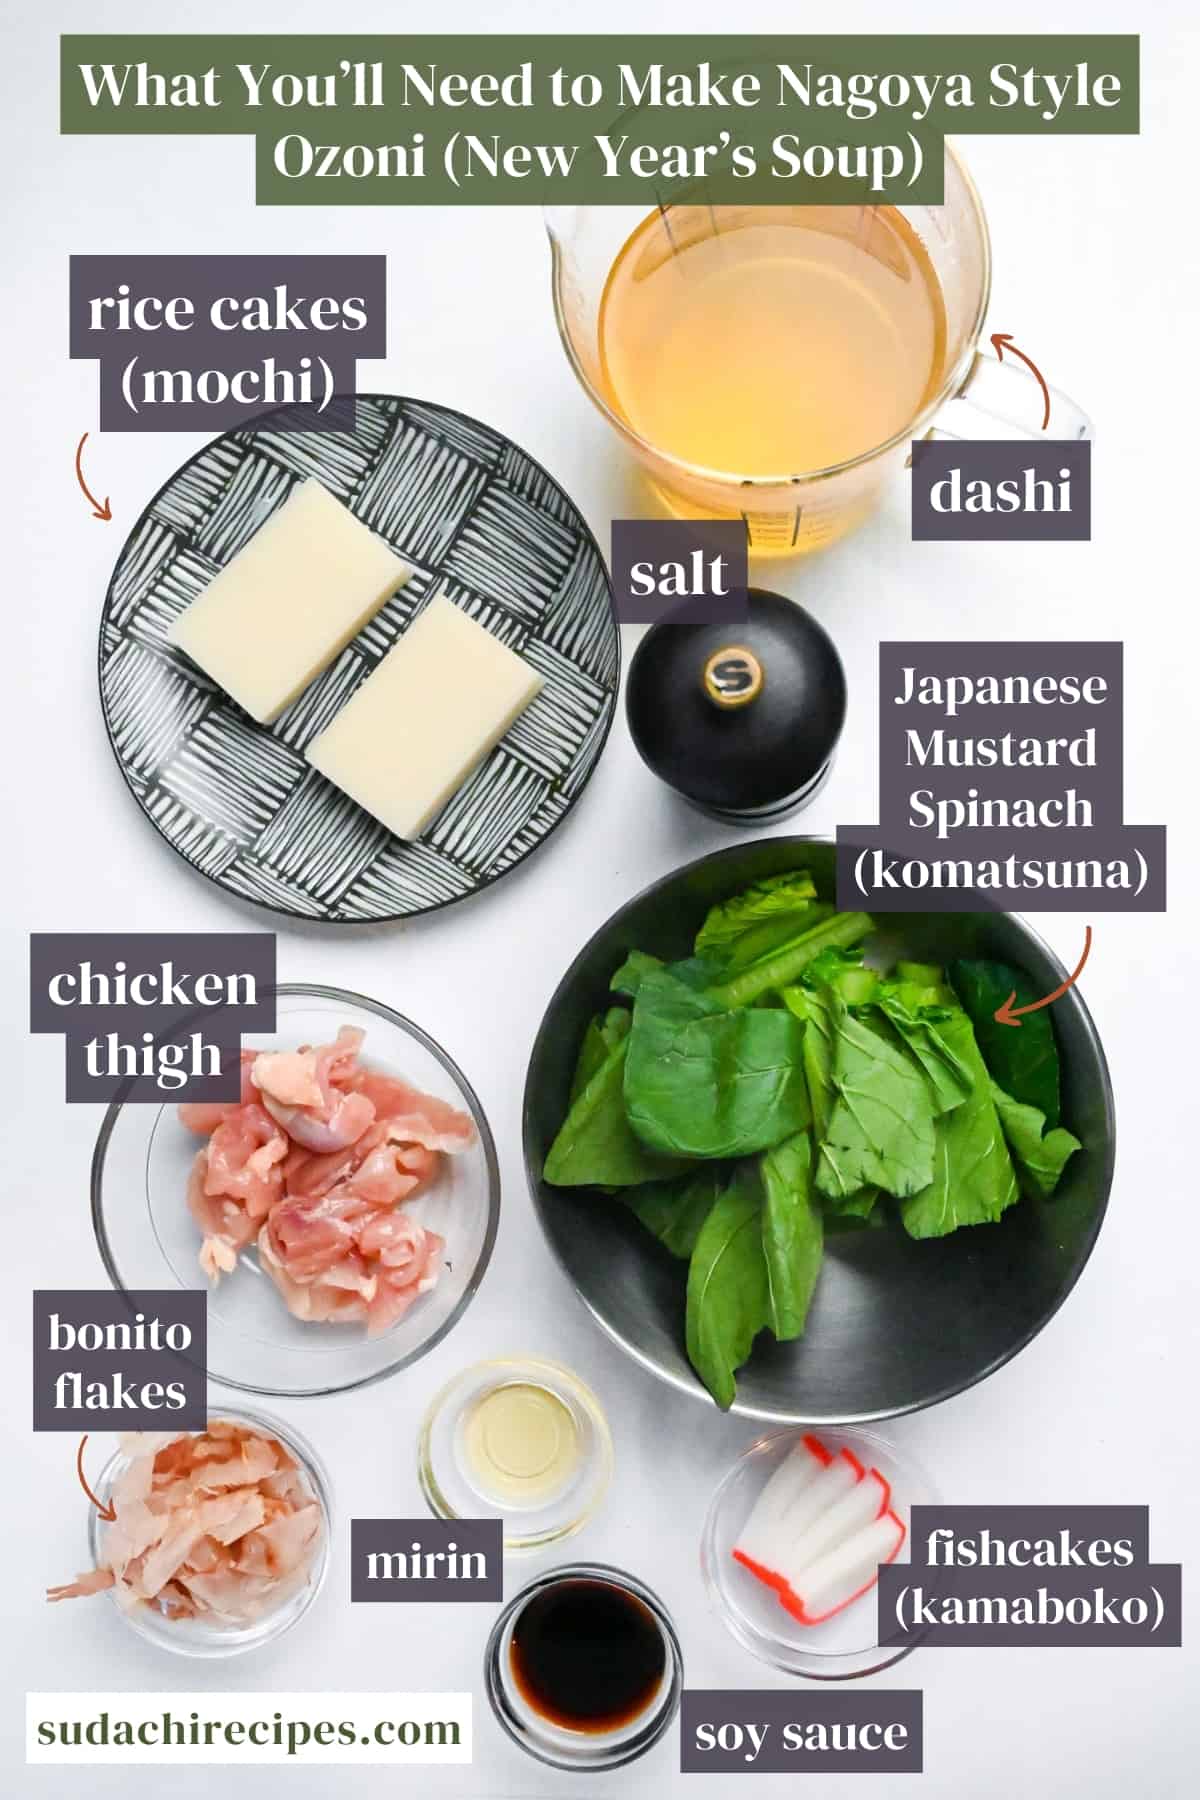 ingredients needed to make Nagoya style Ozoni (New Year's Soup) on a white background with labels